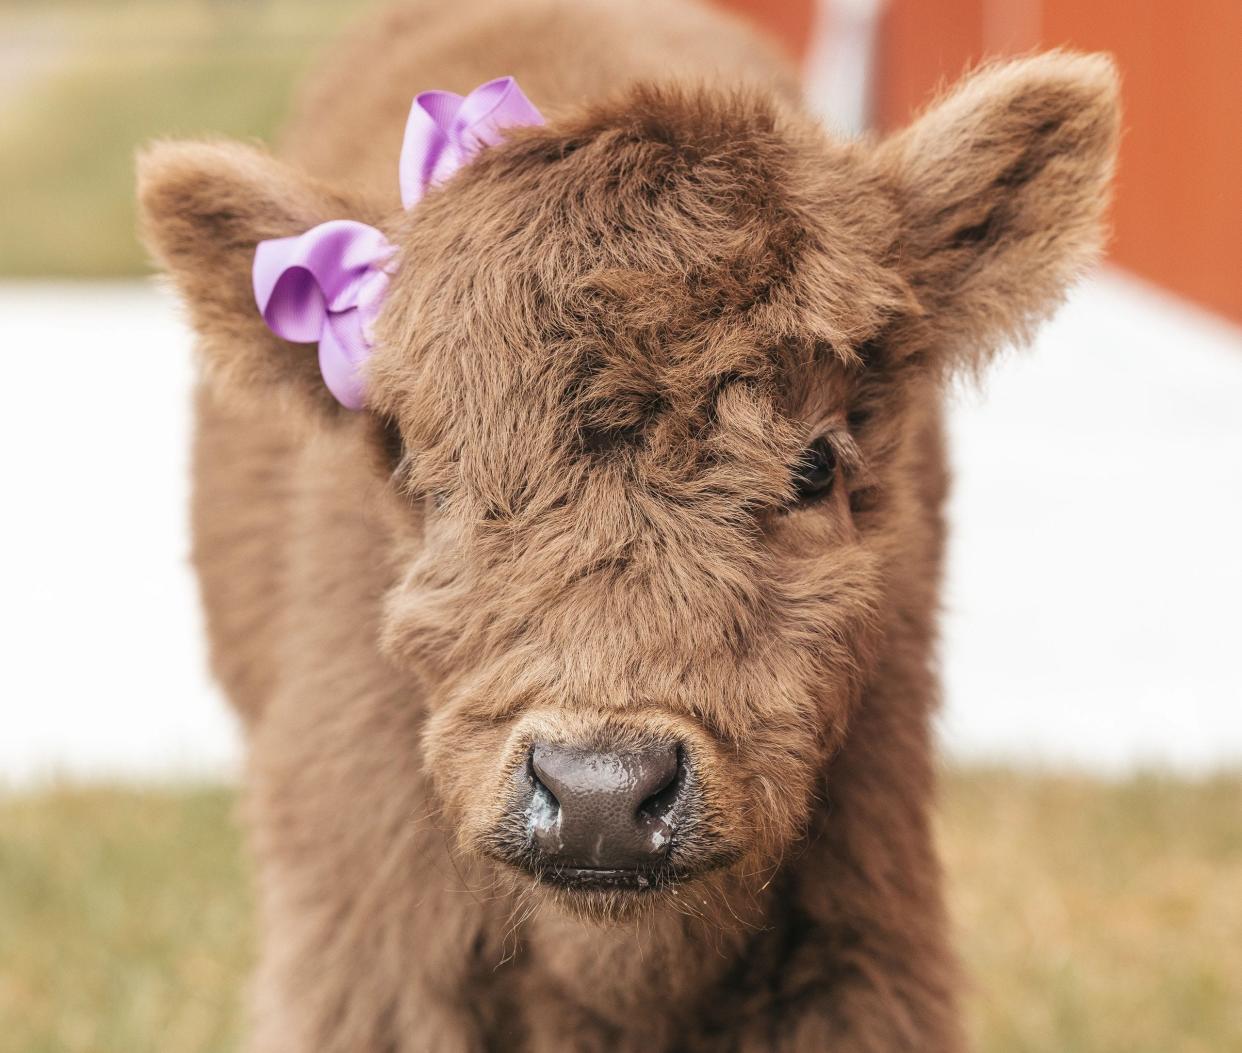 Ella May is a Highland Cow, also known as a mini cow, and is available to be bottle fed by the public.